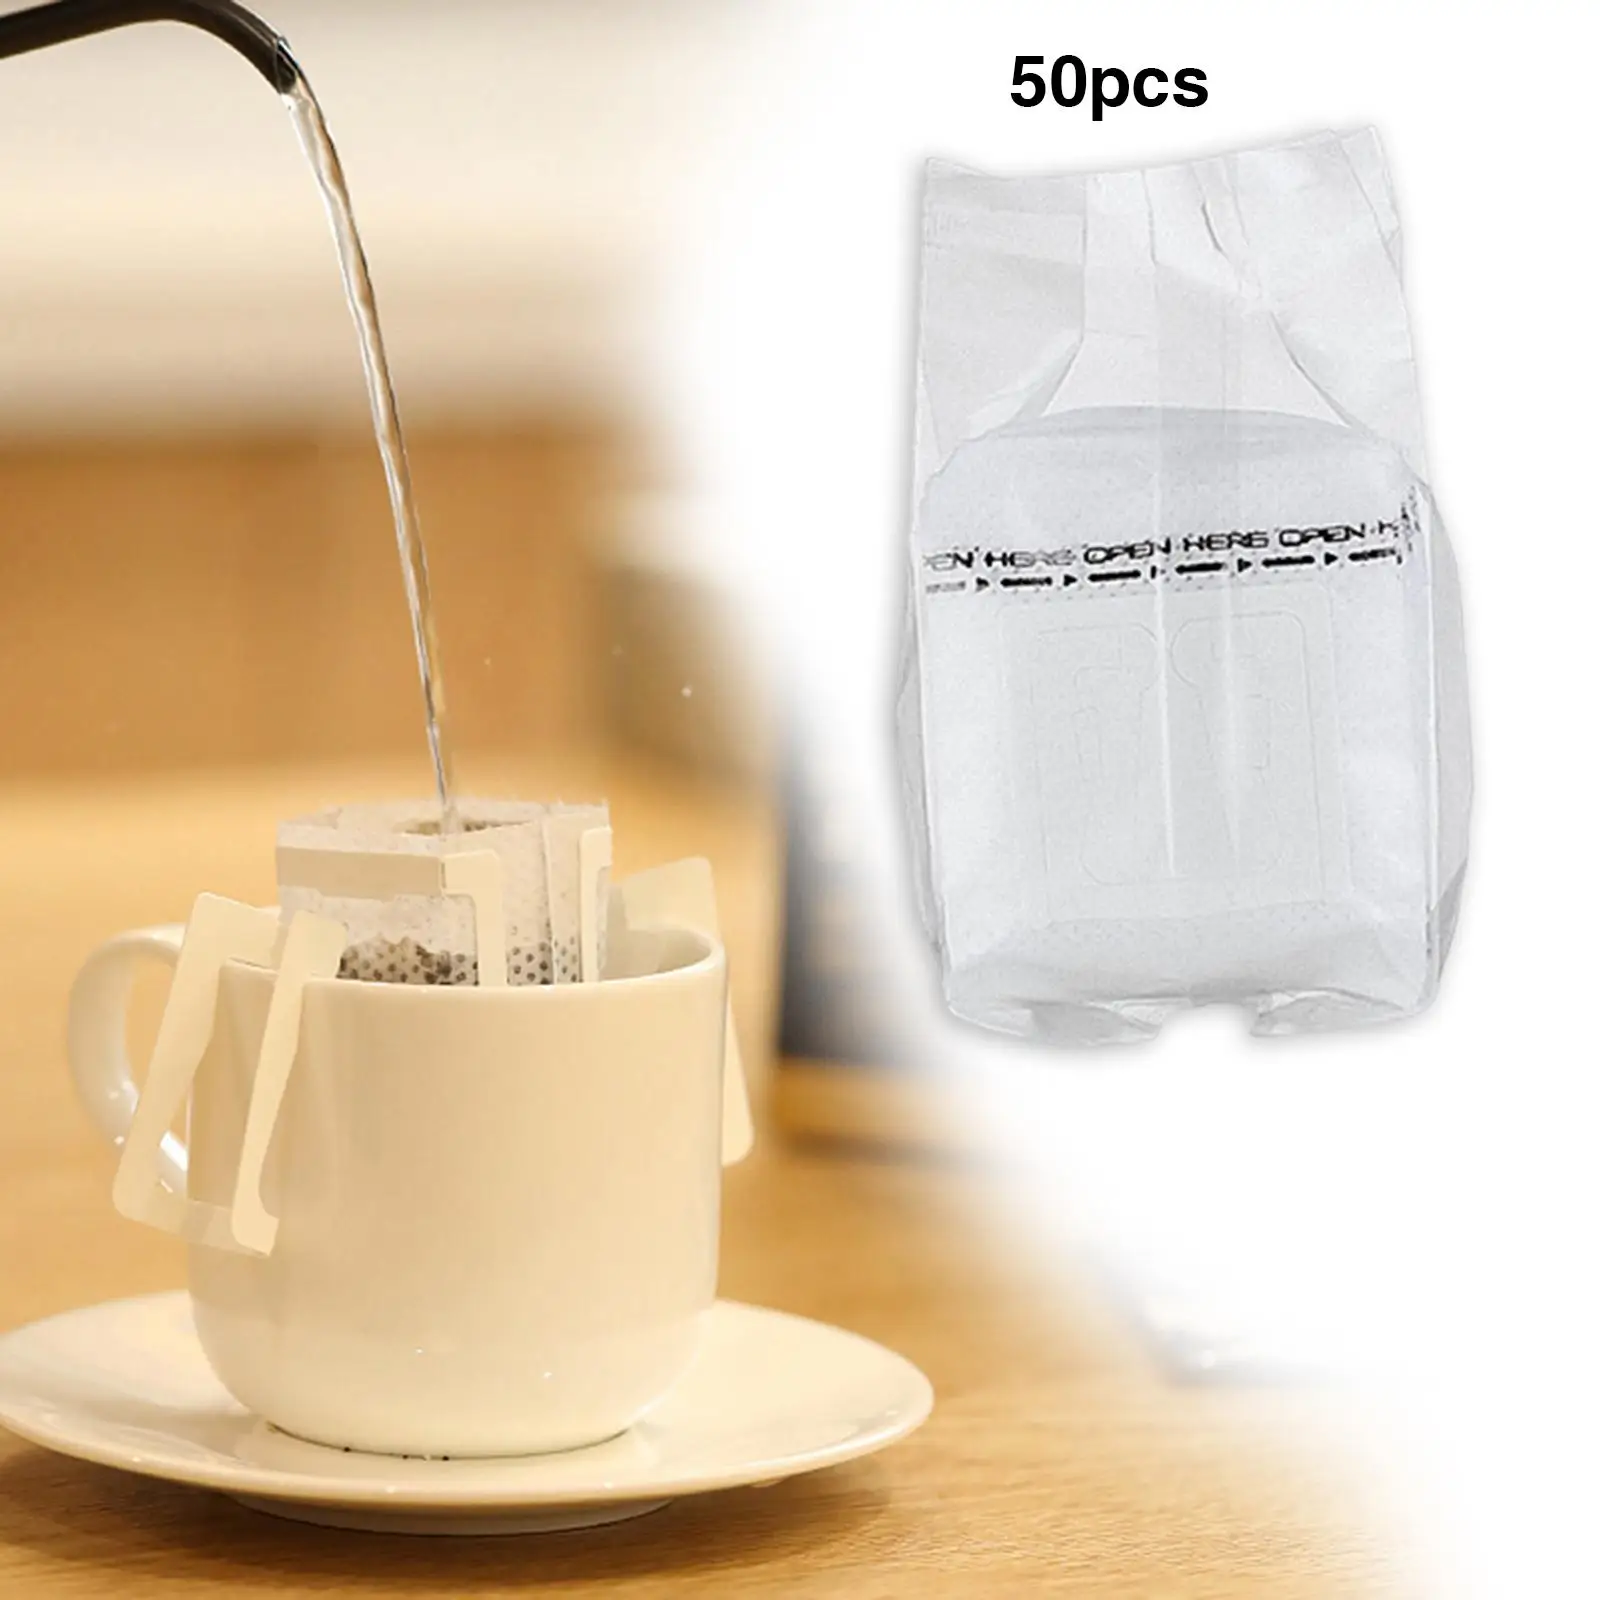 50Pcs Hanging Ear coffee bag, Single Serve Filter Bag with Hanging , for Daily Use Kitchen camping